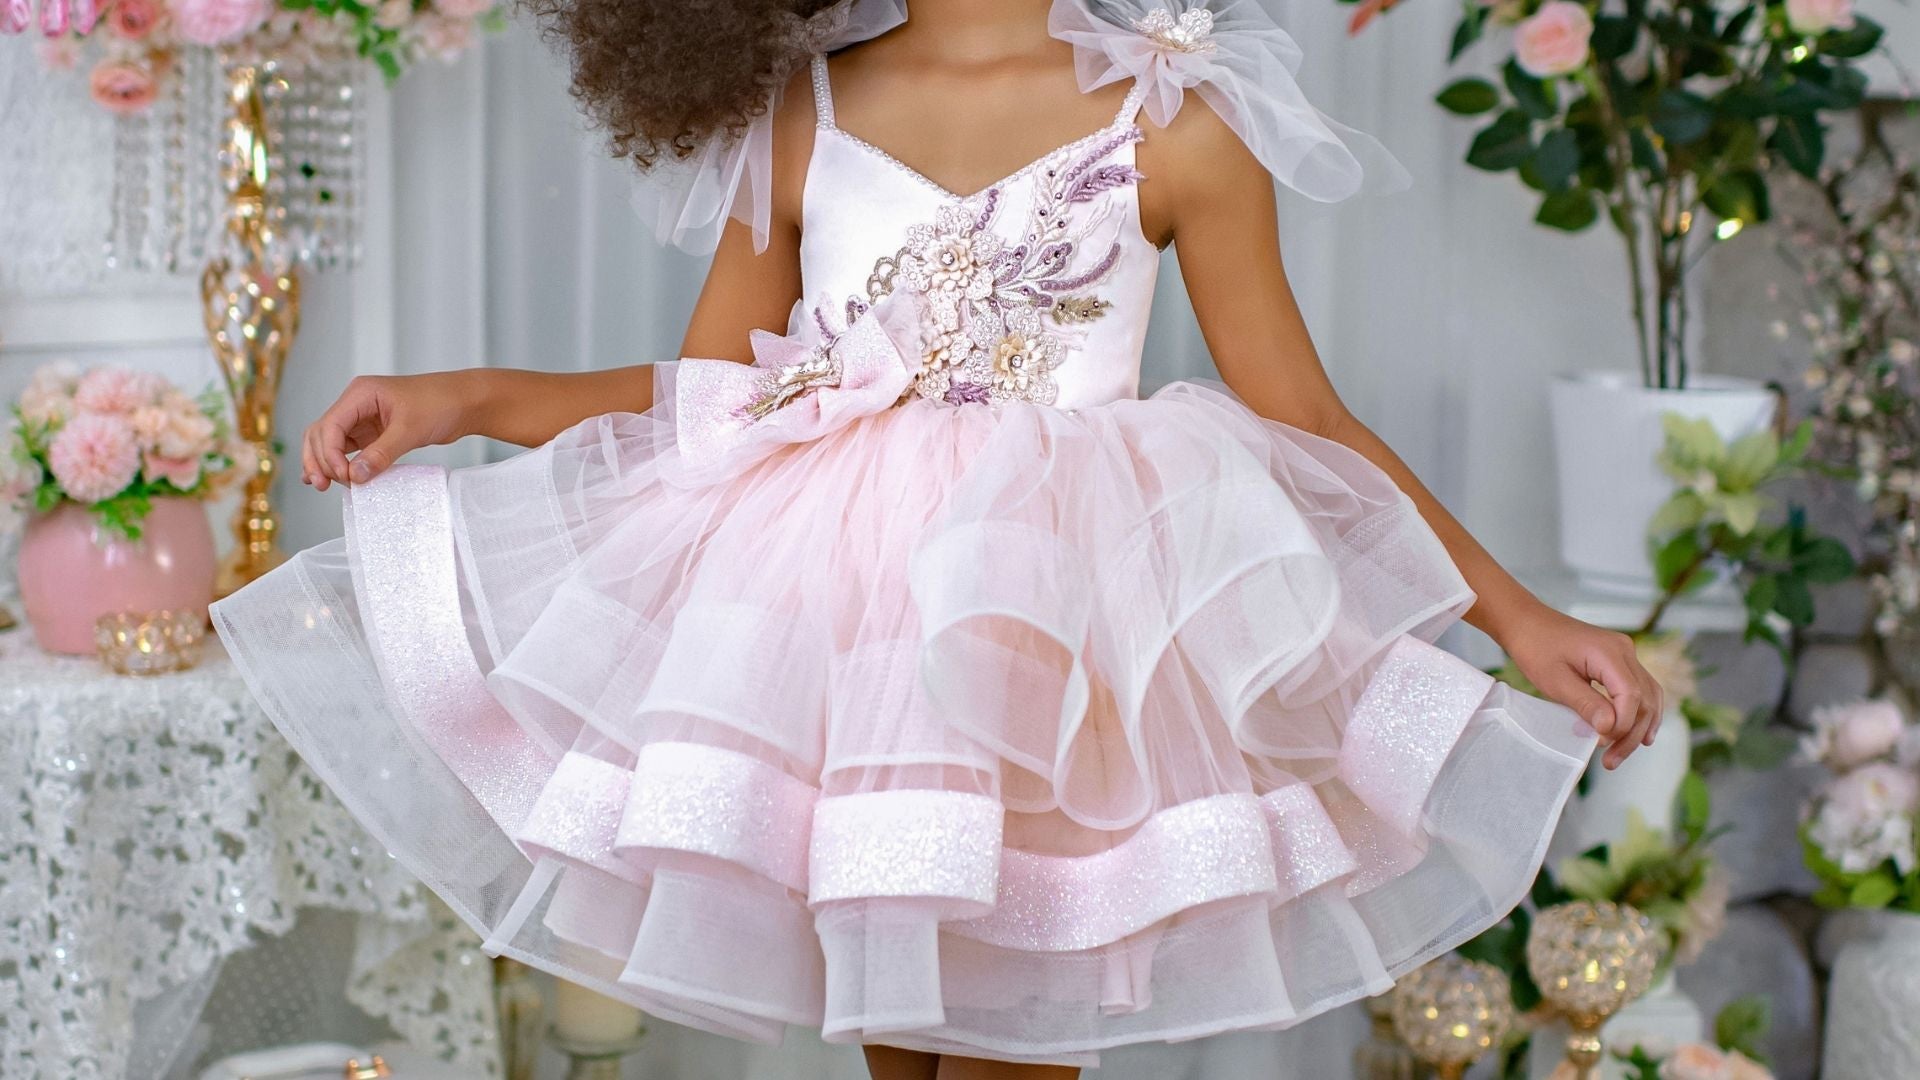 Occasion wear clothing for children